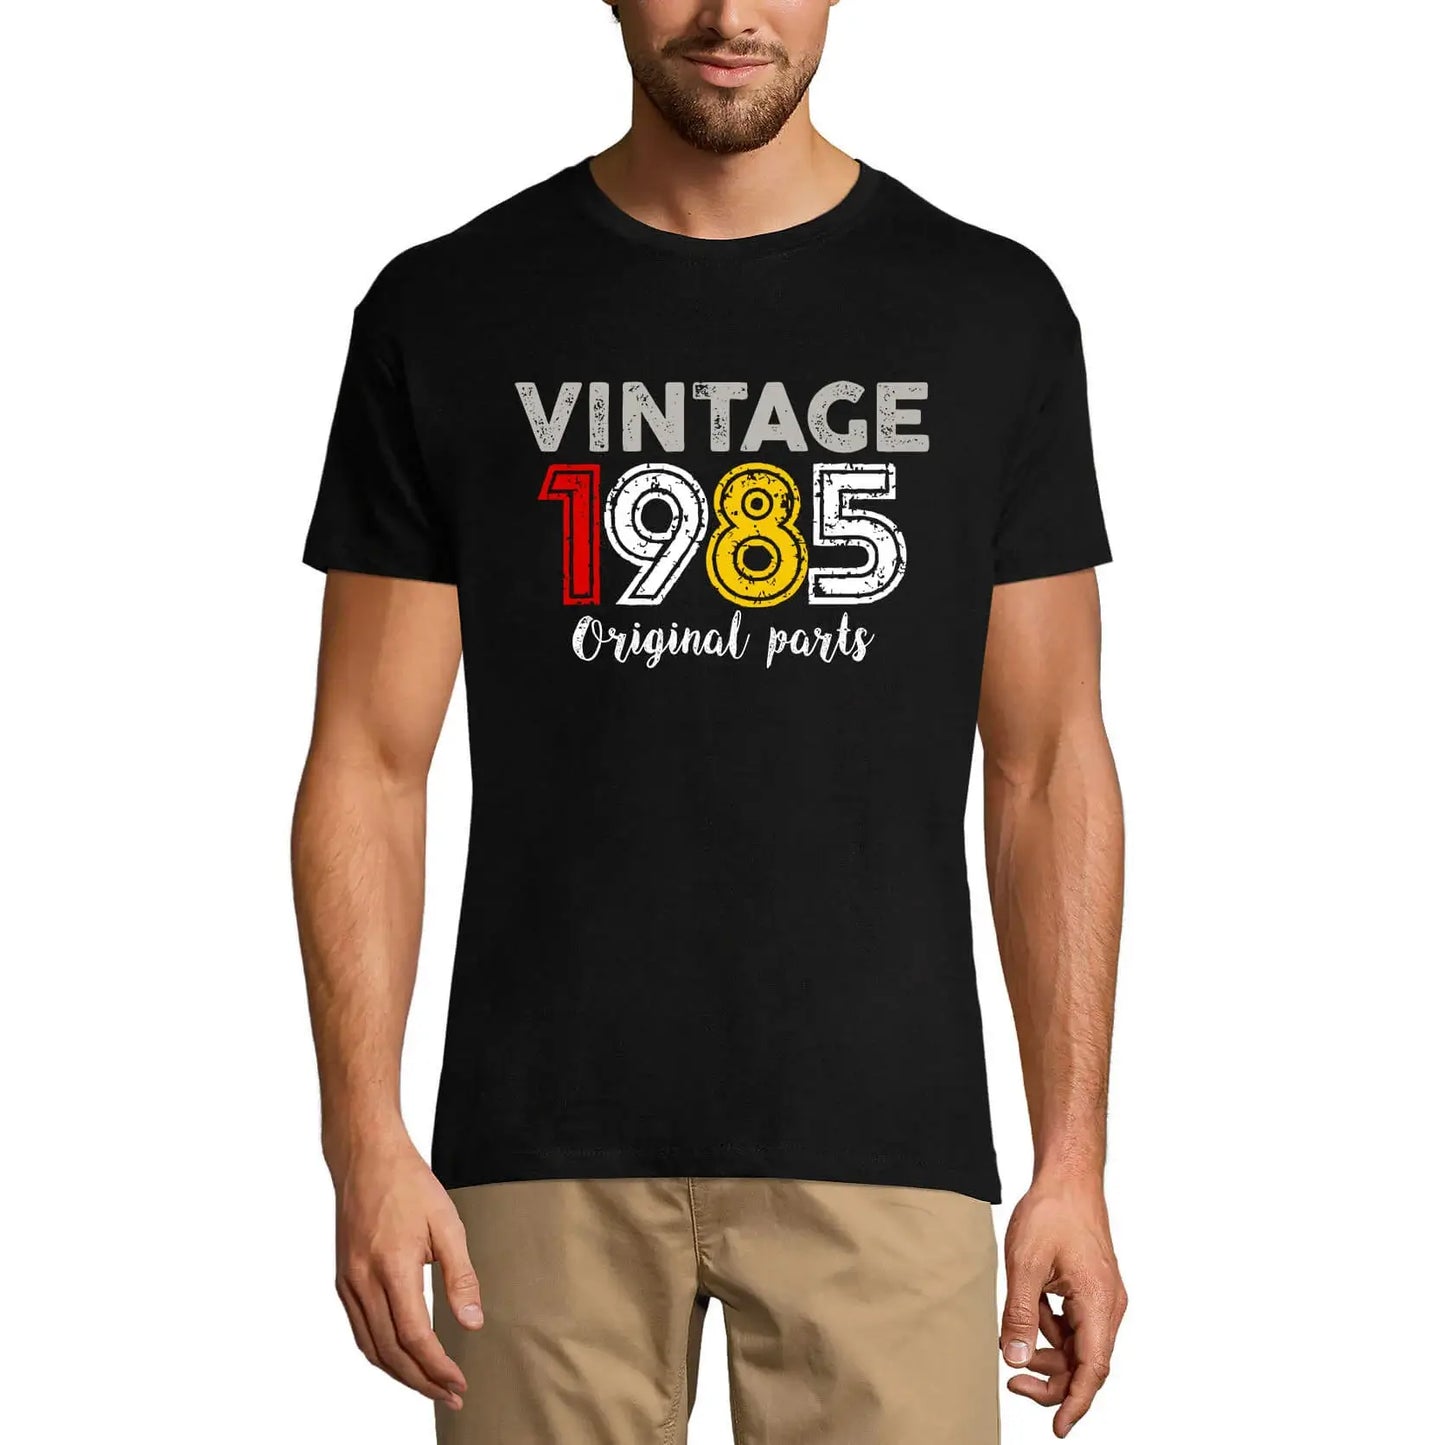 Men's Graphic T-Shirt Original Parts 1985 39th Birthday Anniversary 39 Year Old Gift 1985 Vintage Eco-Friendly Short Sleeve Novelty Tee